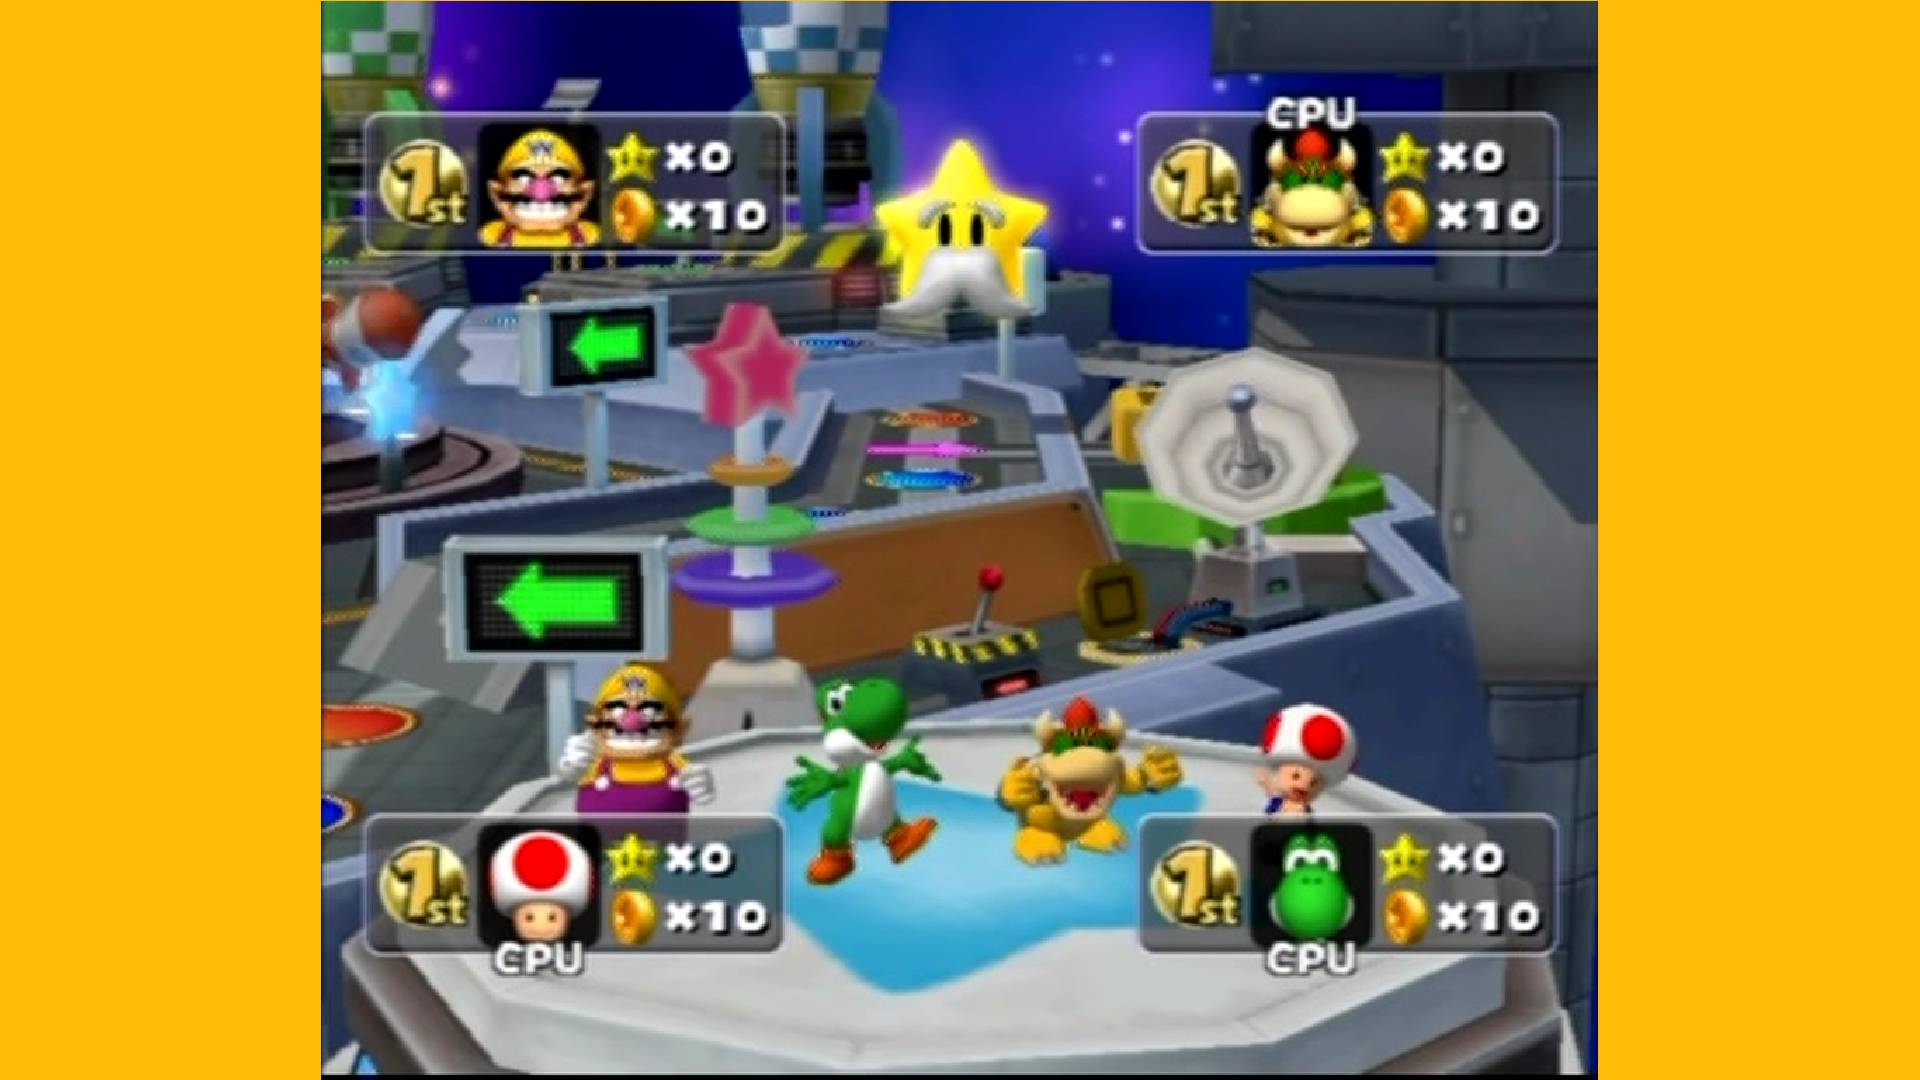 mario party 8 character list